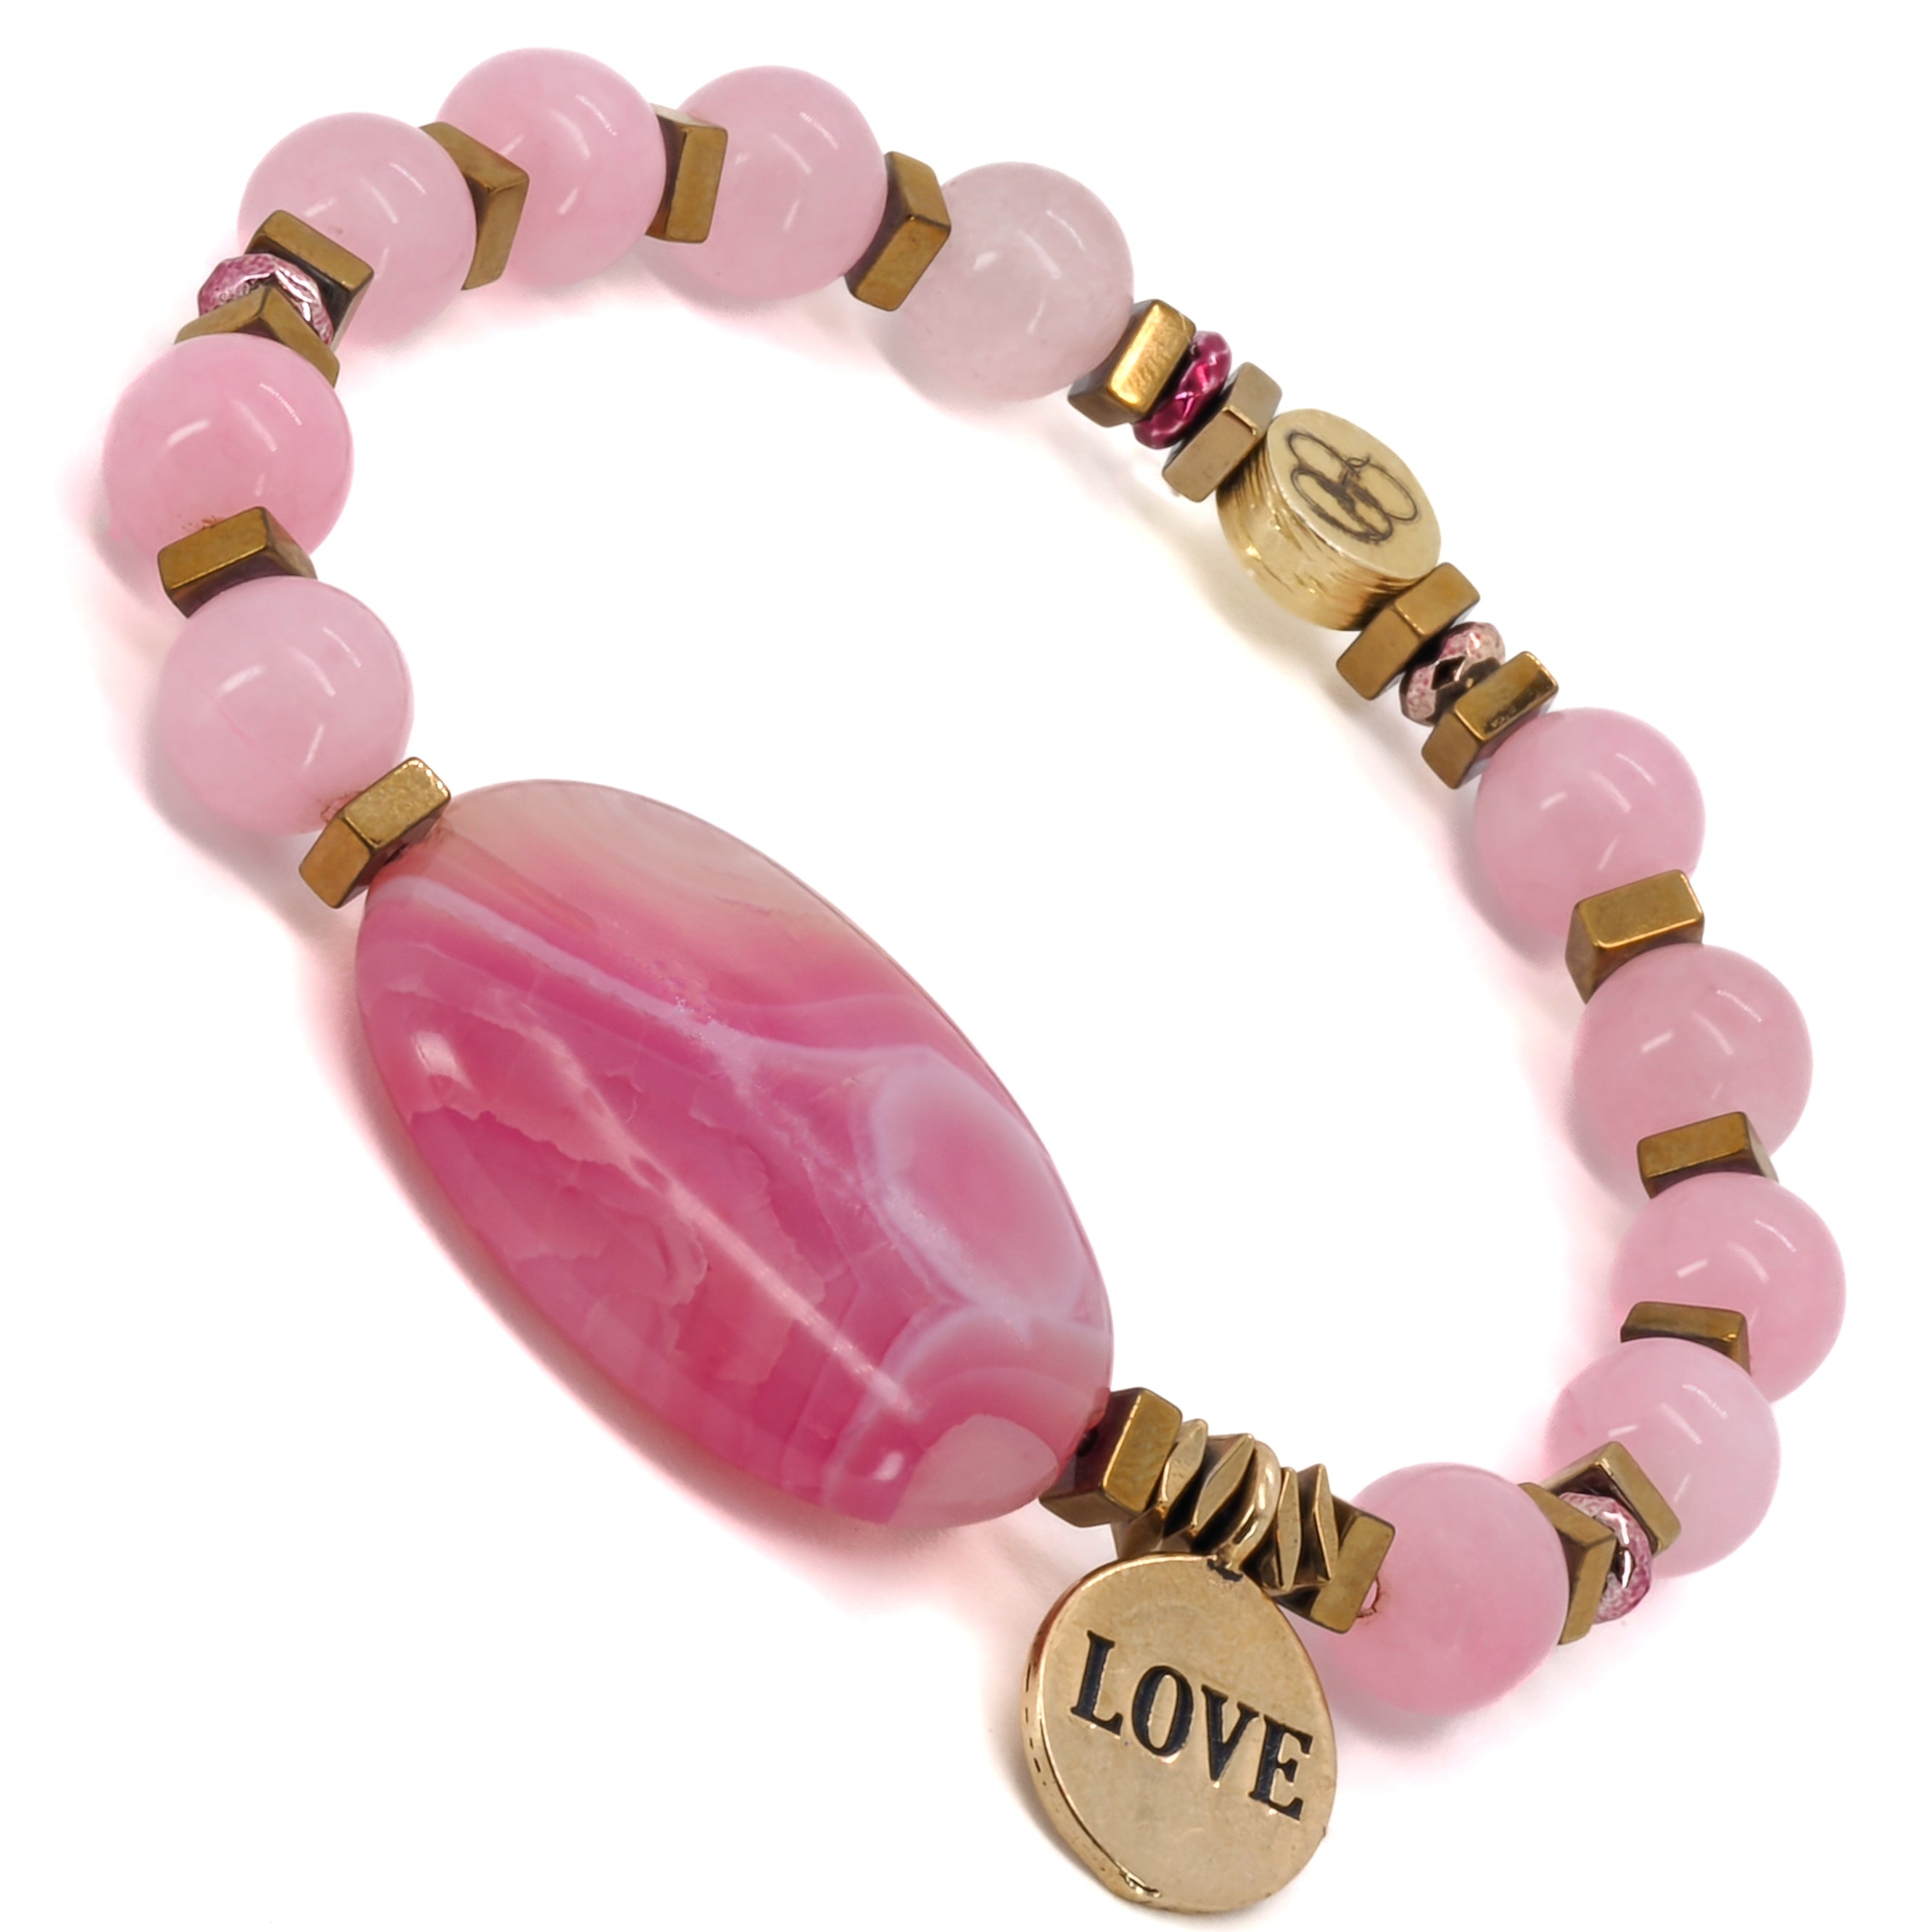 Experience the beauty and significance of the Pink Agate Love Bracelet, a handmade accessory designed to bring love into your life.